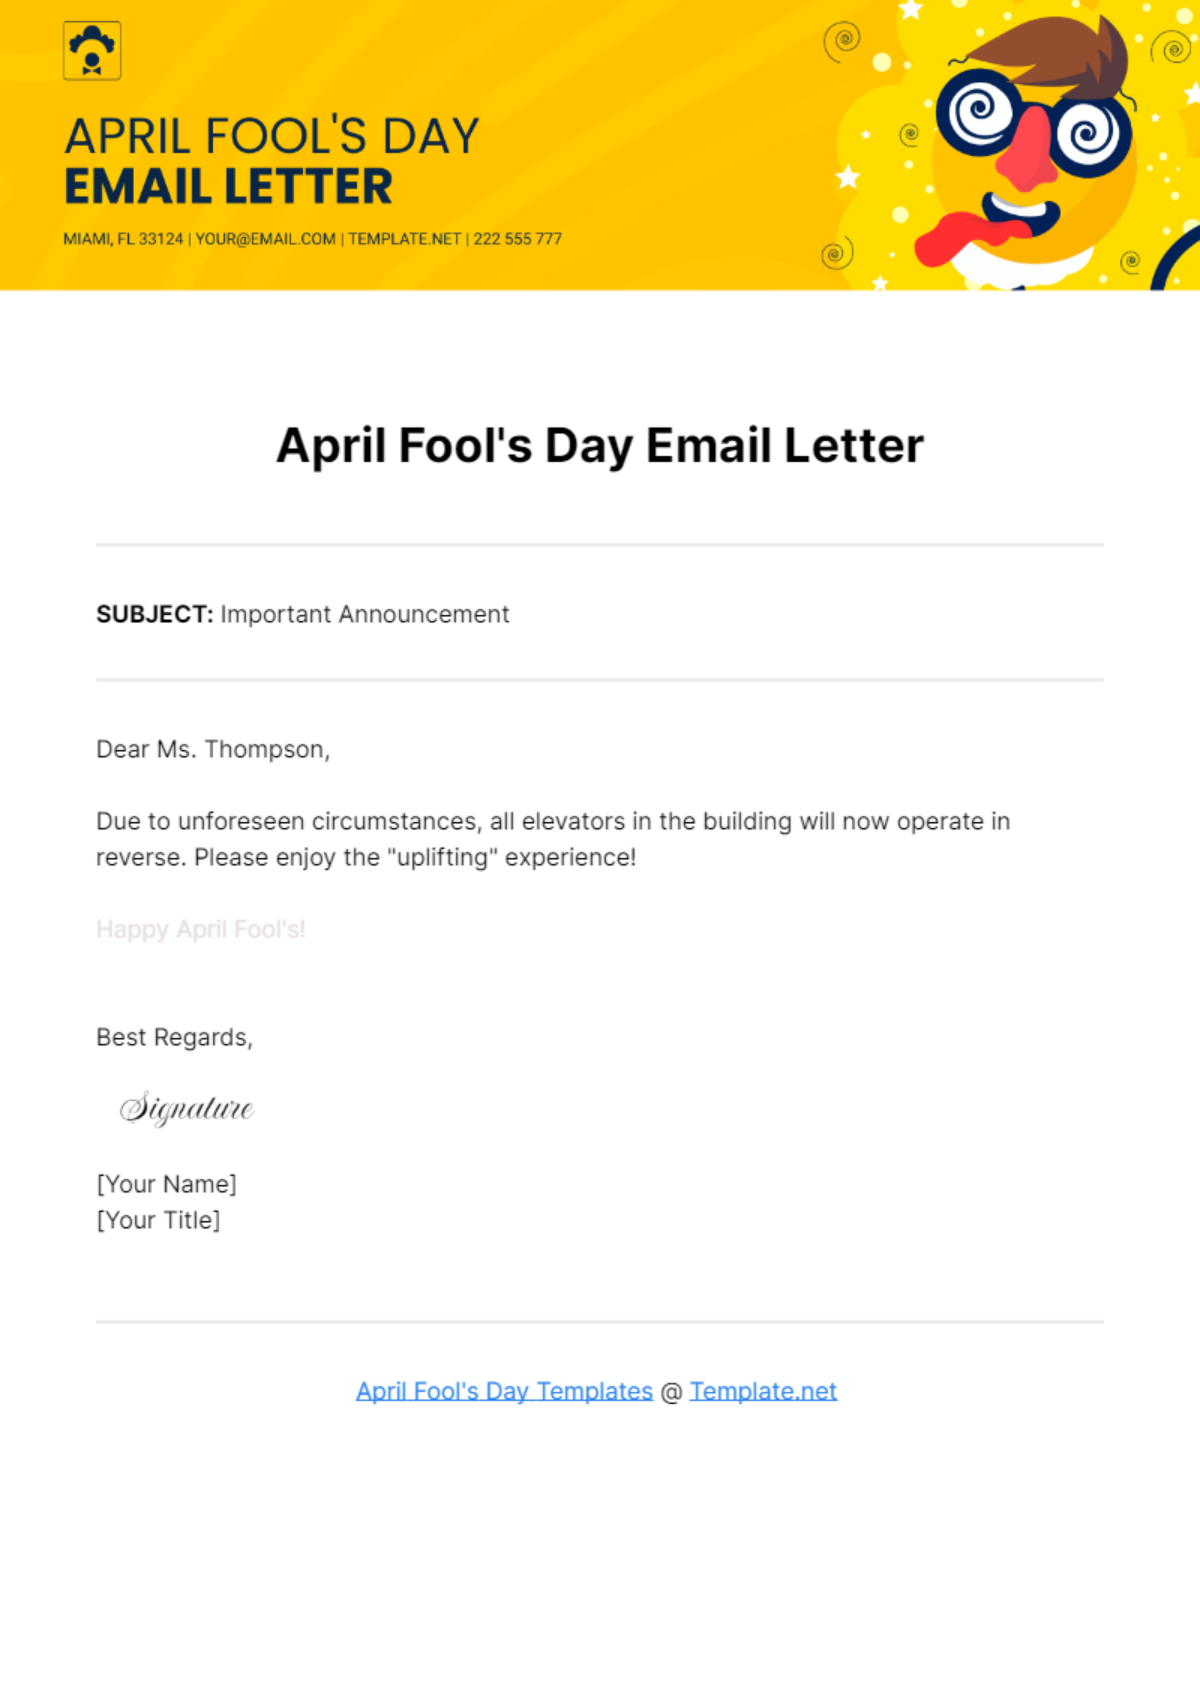 April Fool's Day Email Letter Template